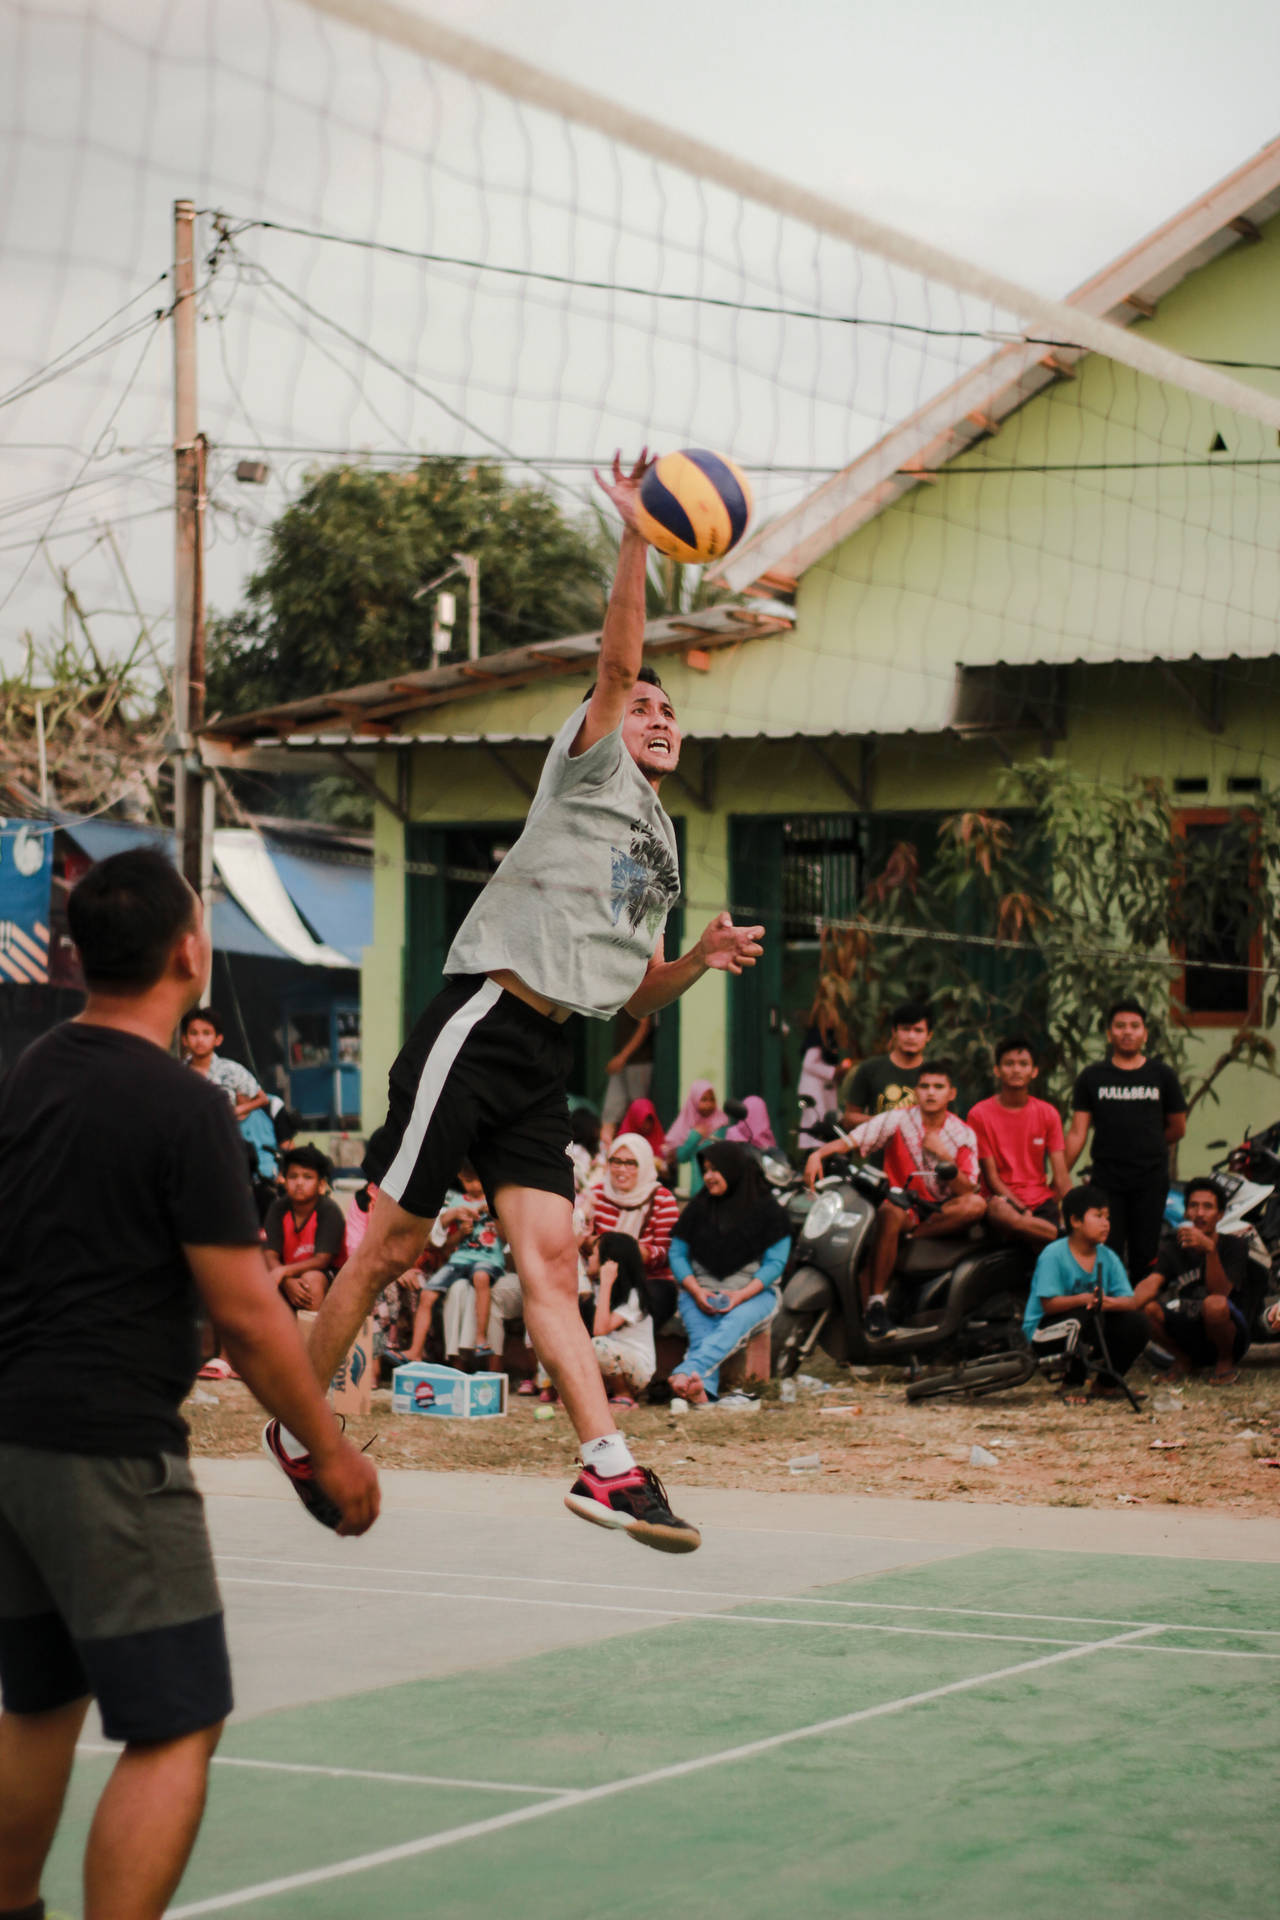 Volleyball Match At A Village Background